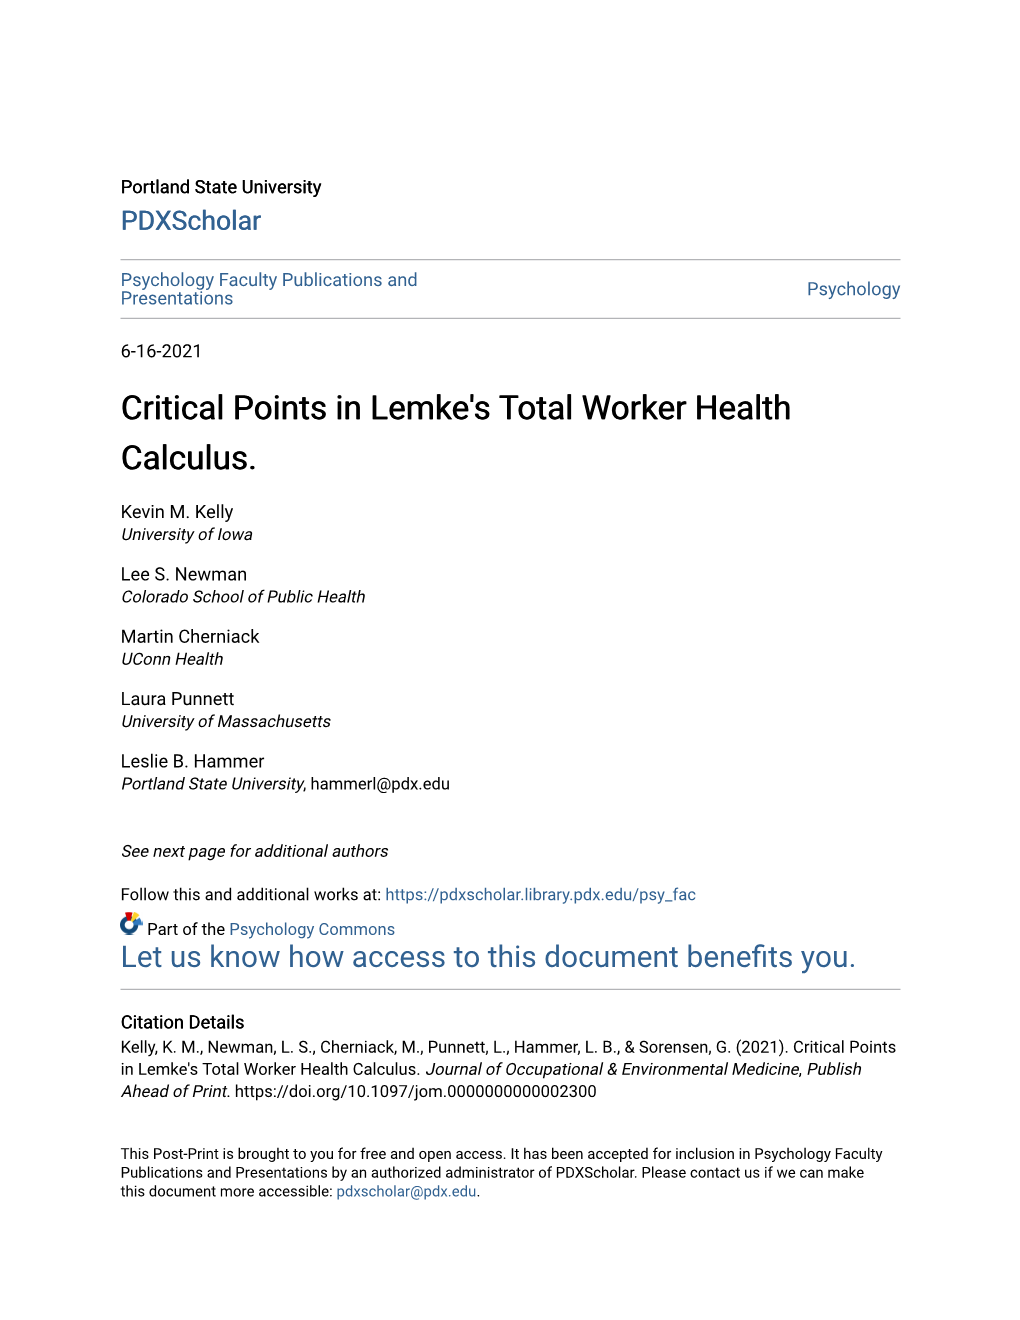 Critical Points in Lemke's Total Worker Health Calculus